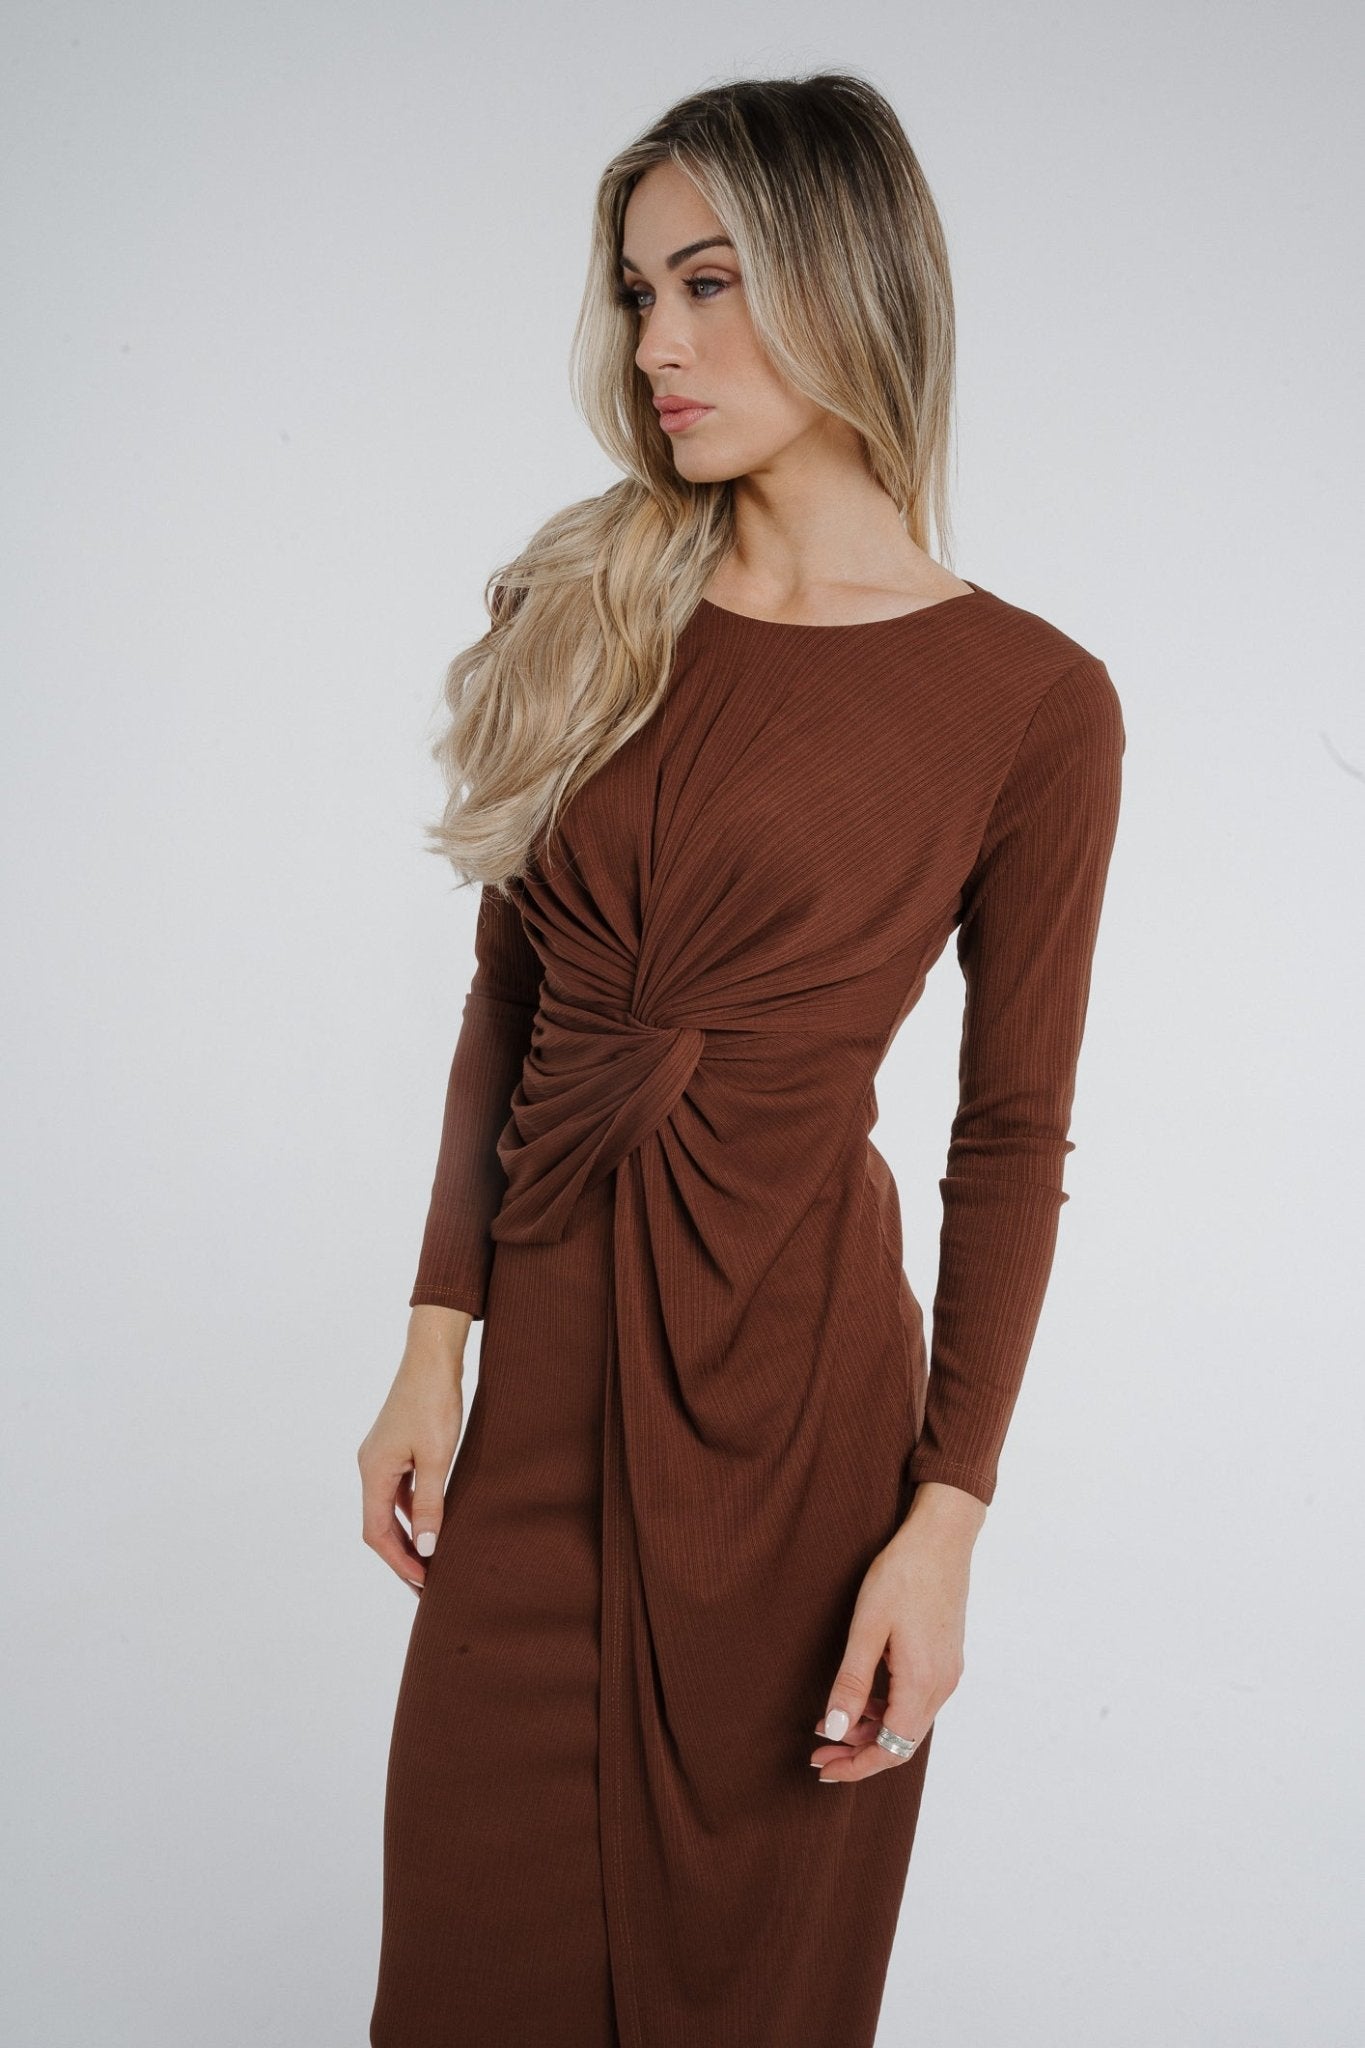 Kelly Knot Front Midi Dress In Chocolate - The Walk in Wardrobe